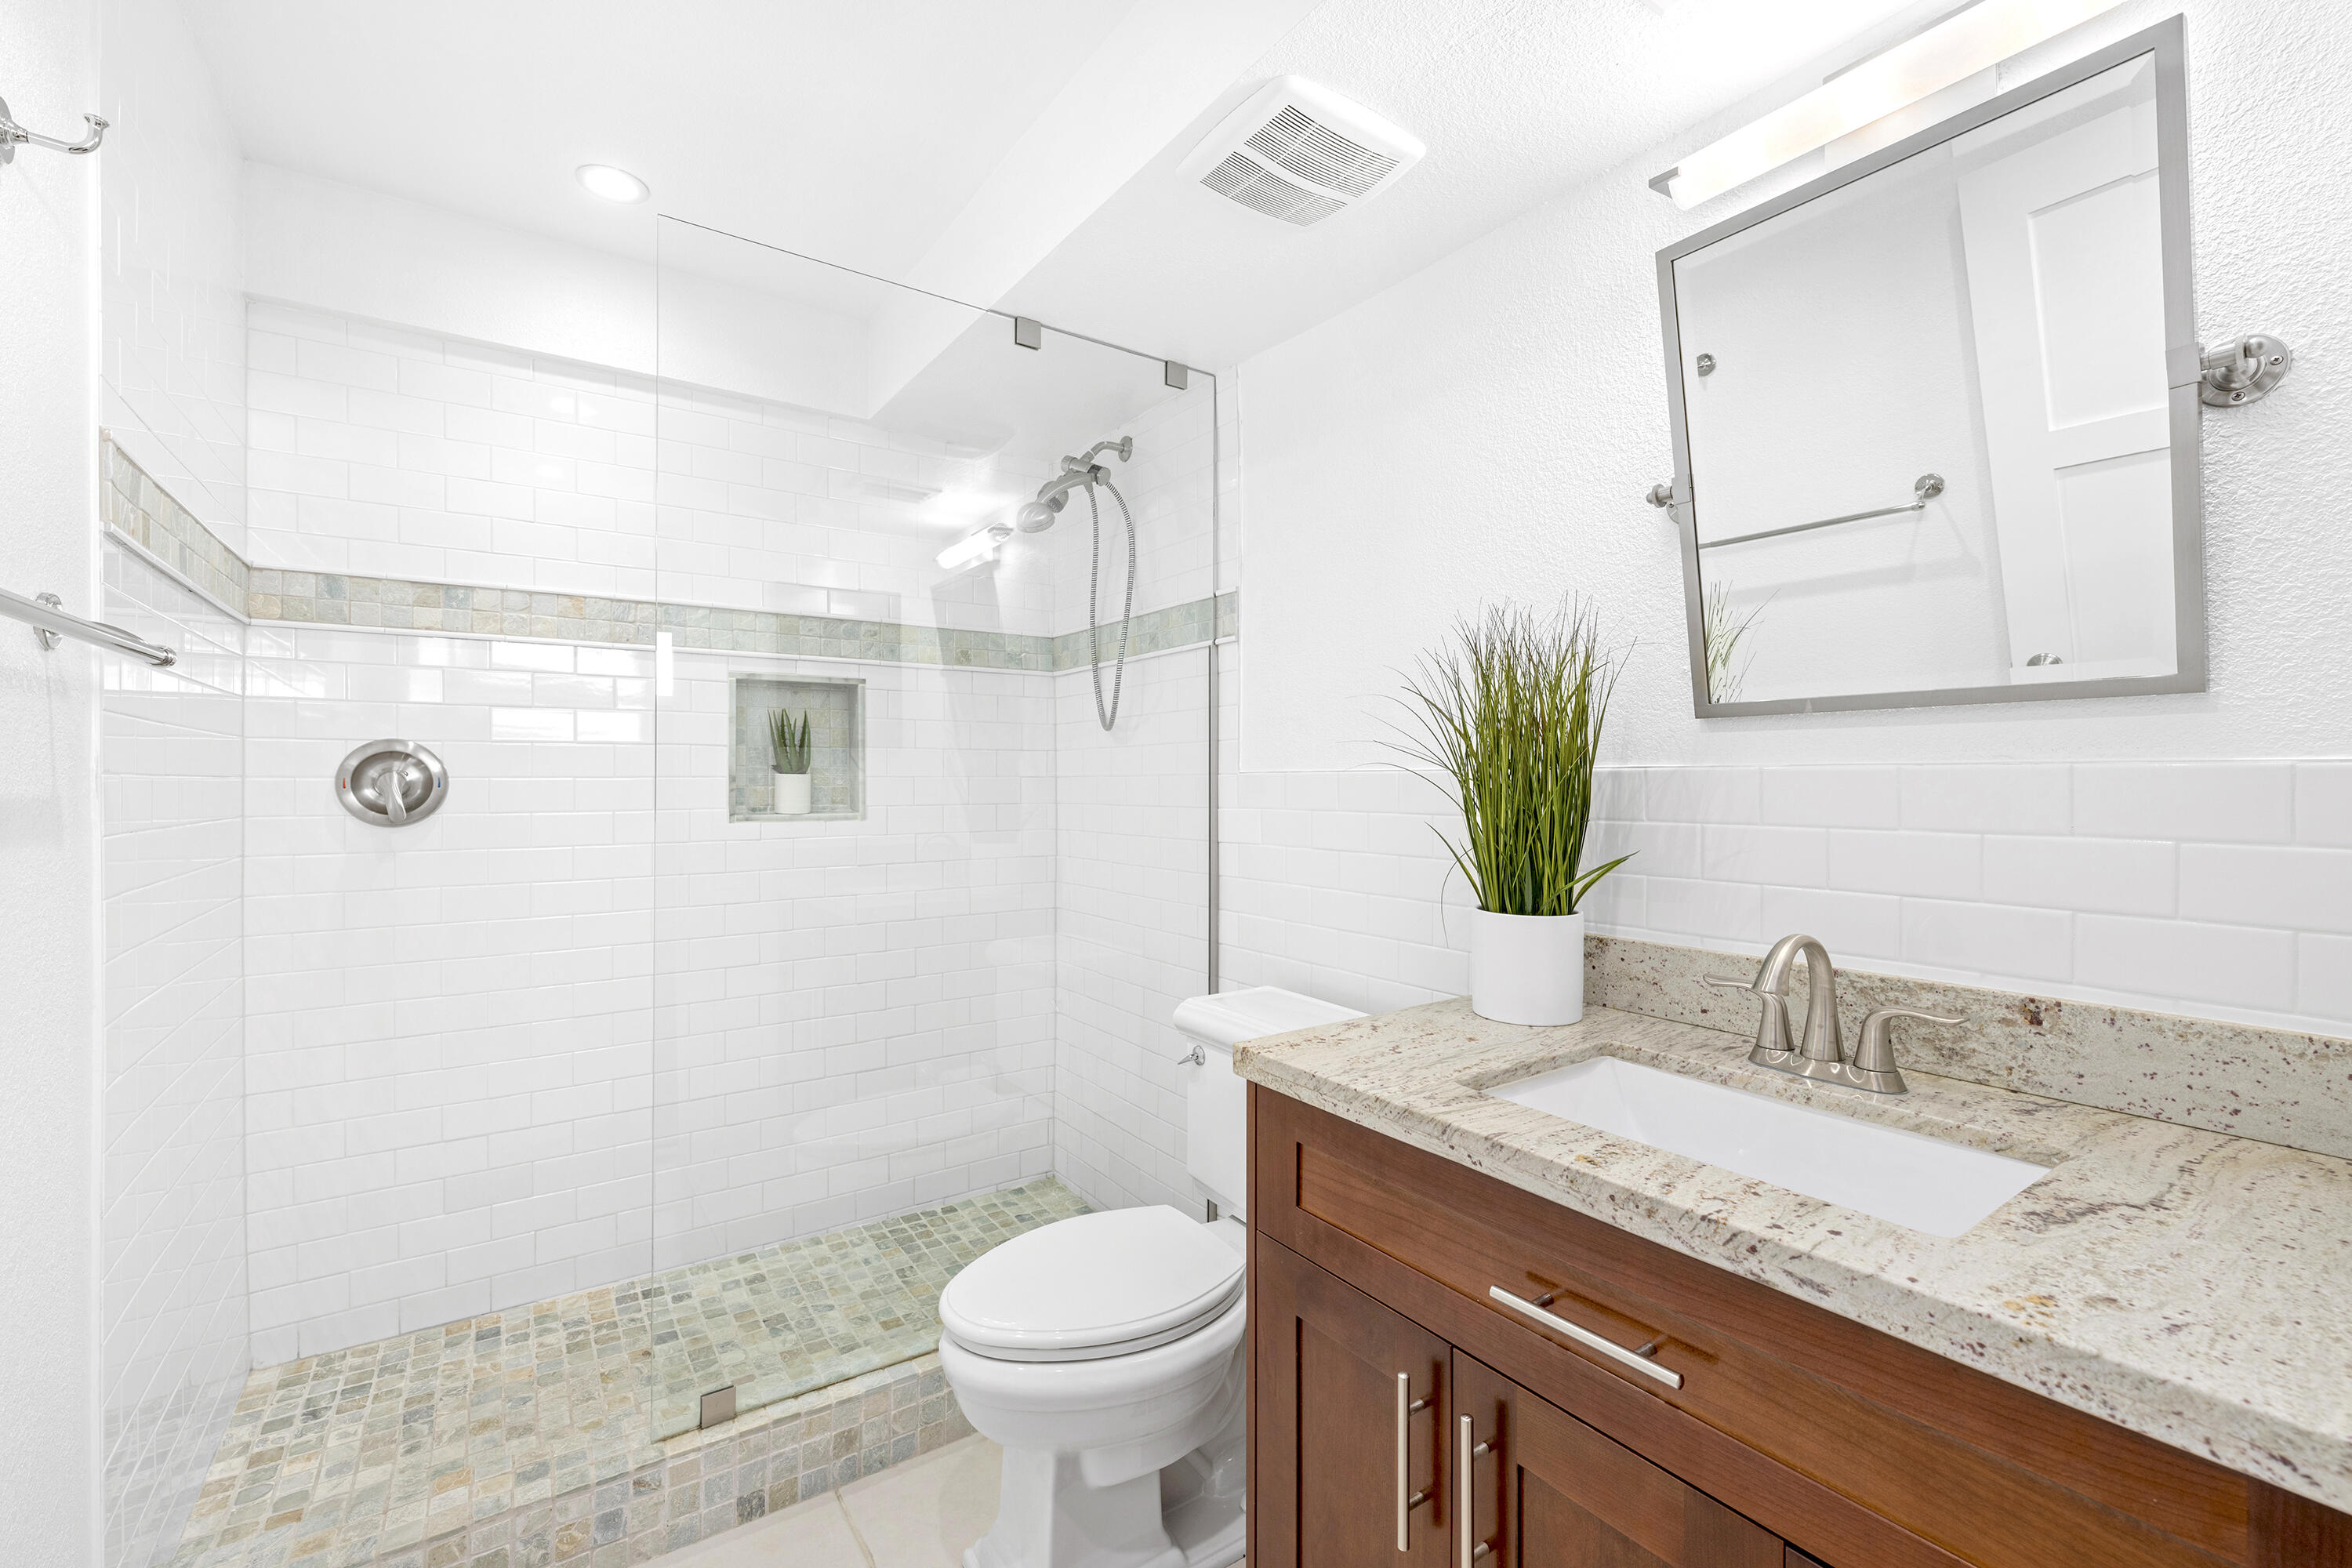 a bathroom with a granite countertop sink toilet and shower